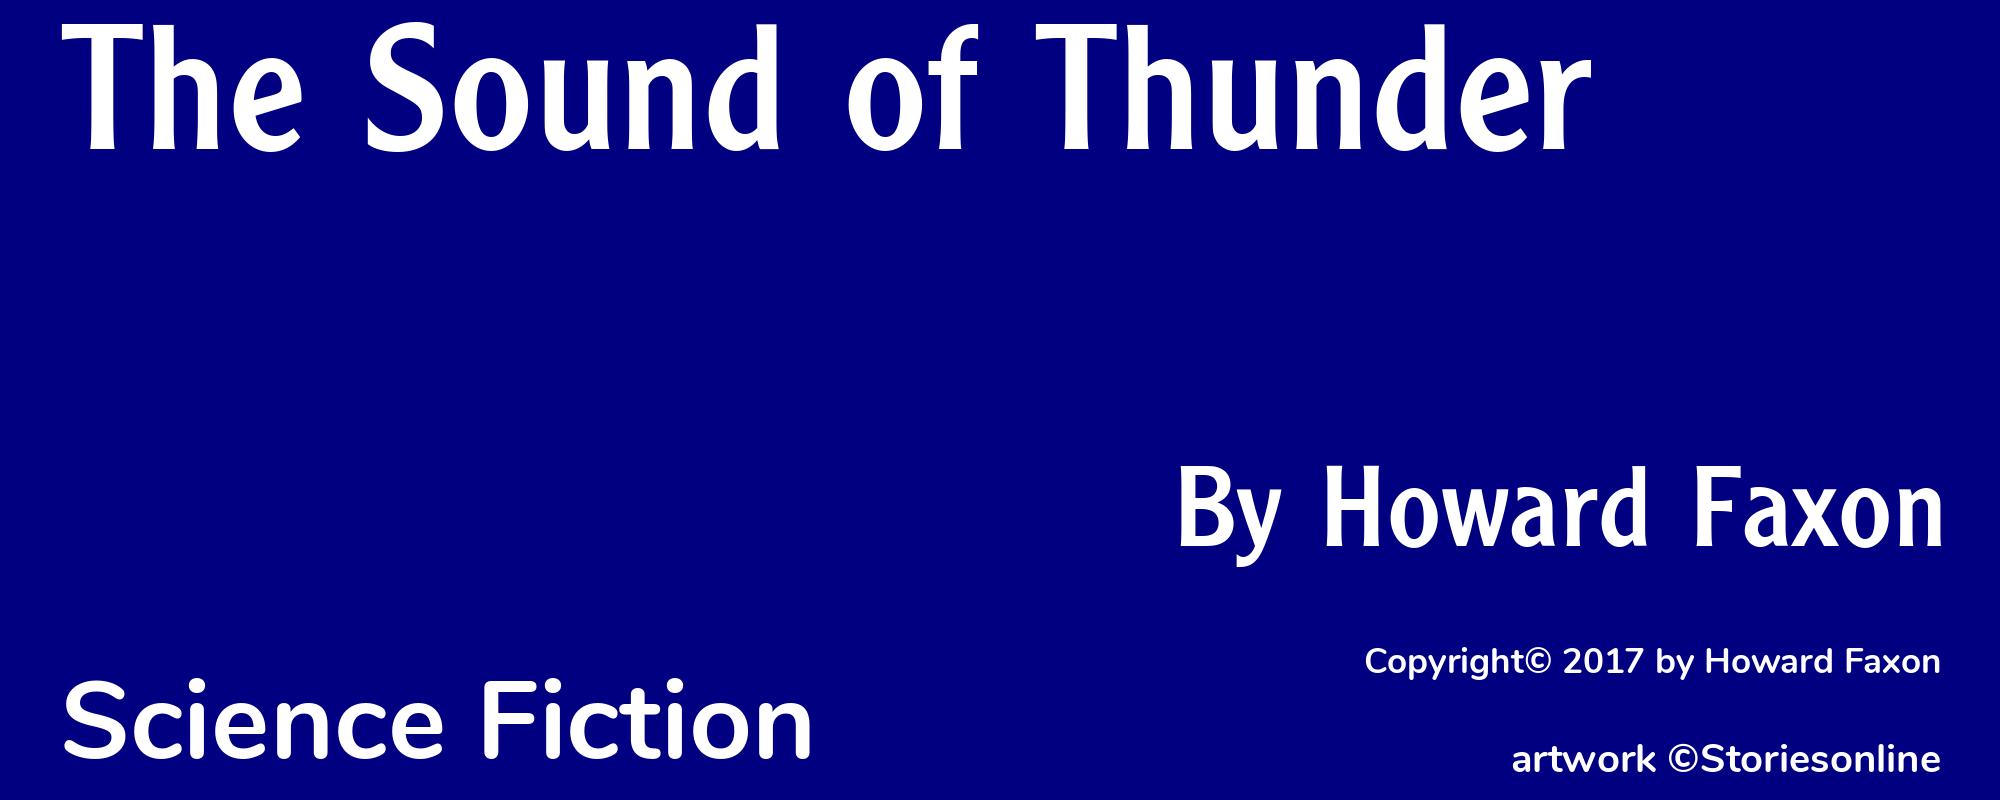 The Sound of Thunder - Cover